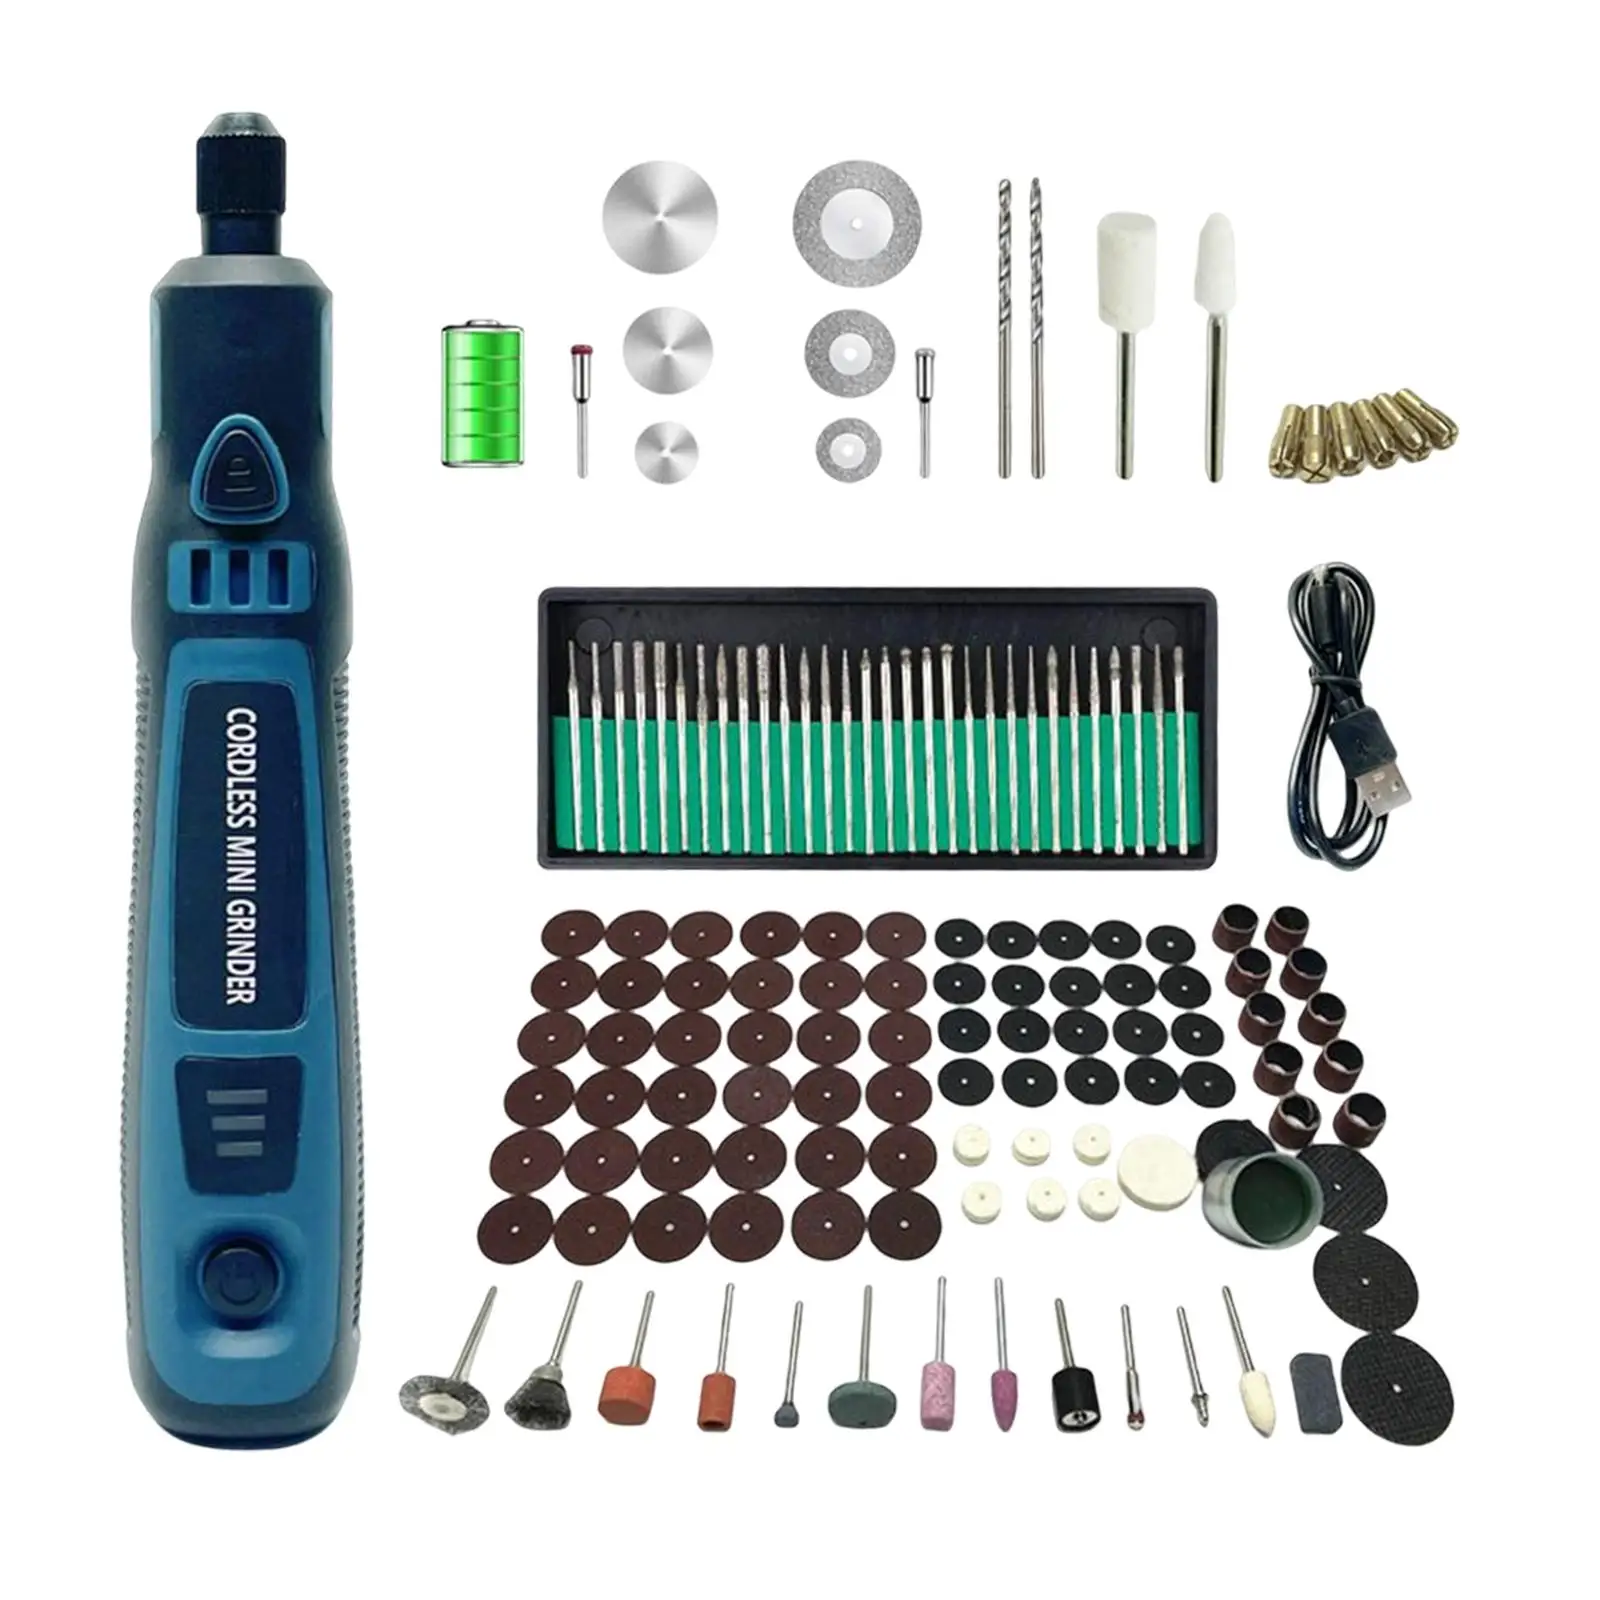 Portable Grinder Kit with Accessories Drill Tool Rotary Tool 3 Speeds for Hobby Craft Drilling Etching Sanding Polishing